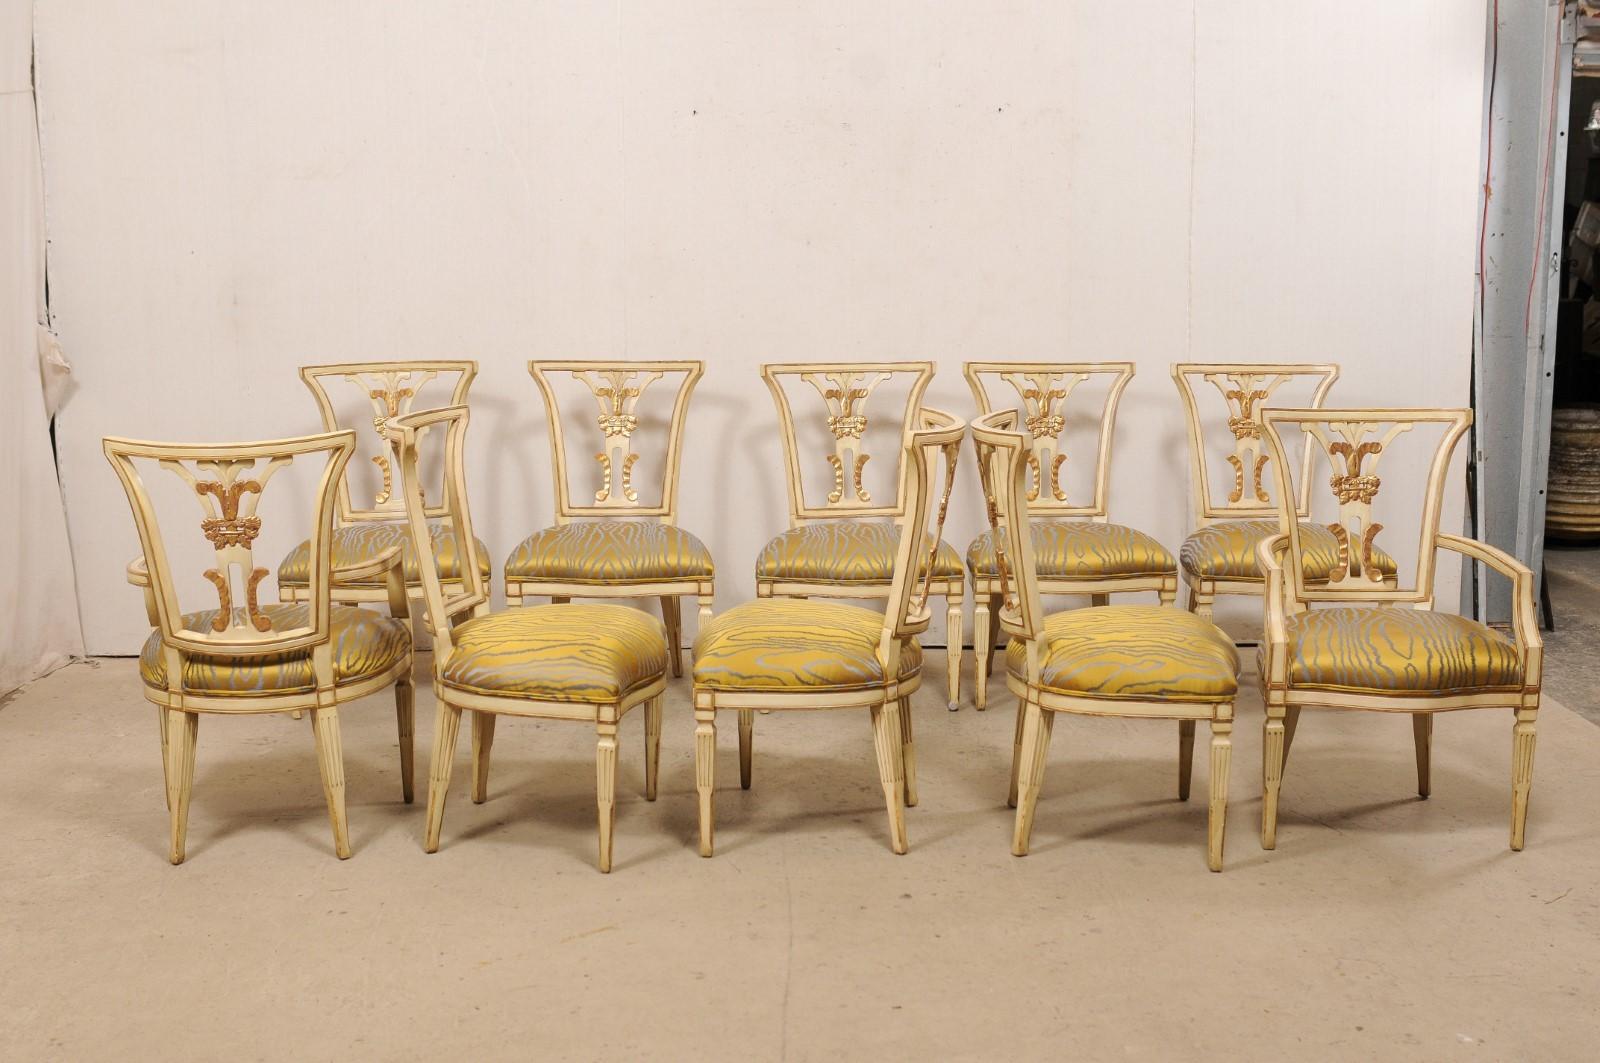 Upholstery Italian Set of Ten Dining Chairs W/ Front and Backs Carved & W/Original Gilt